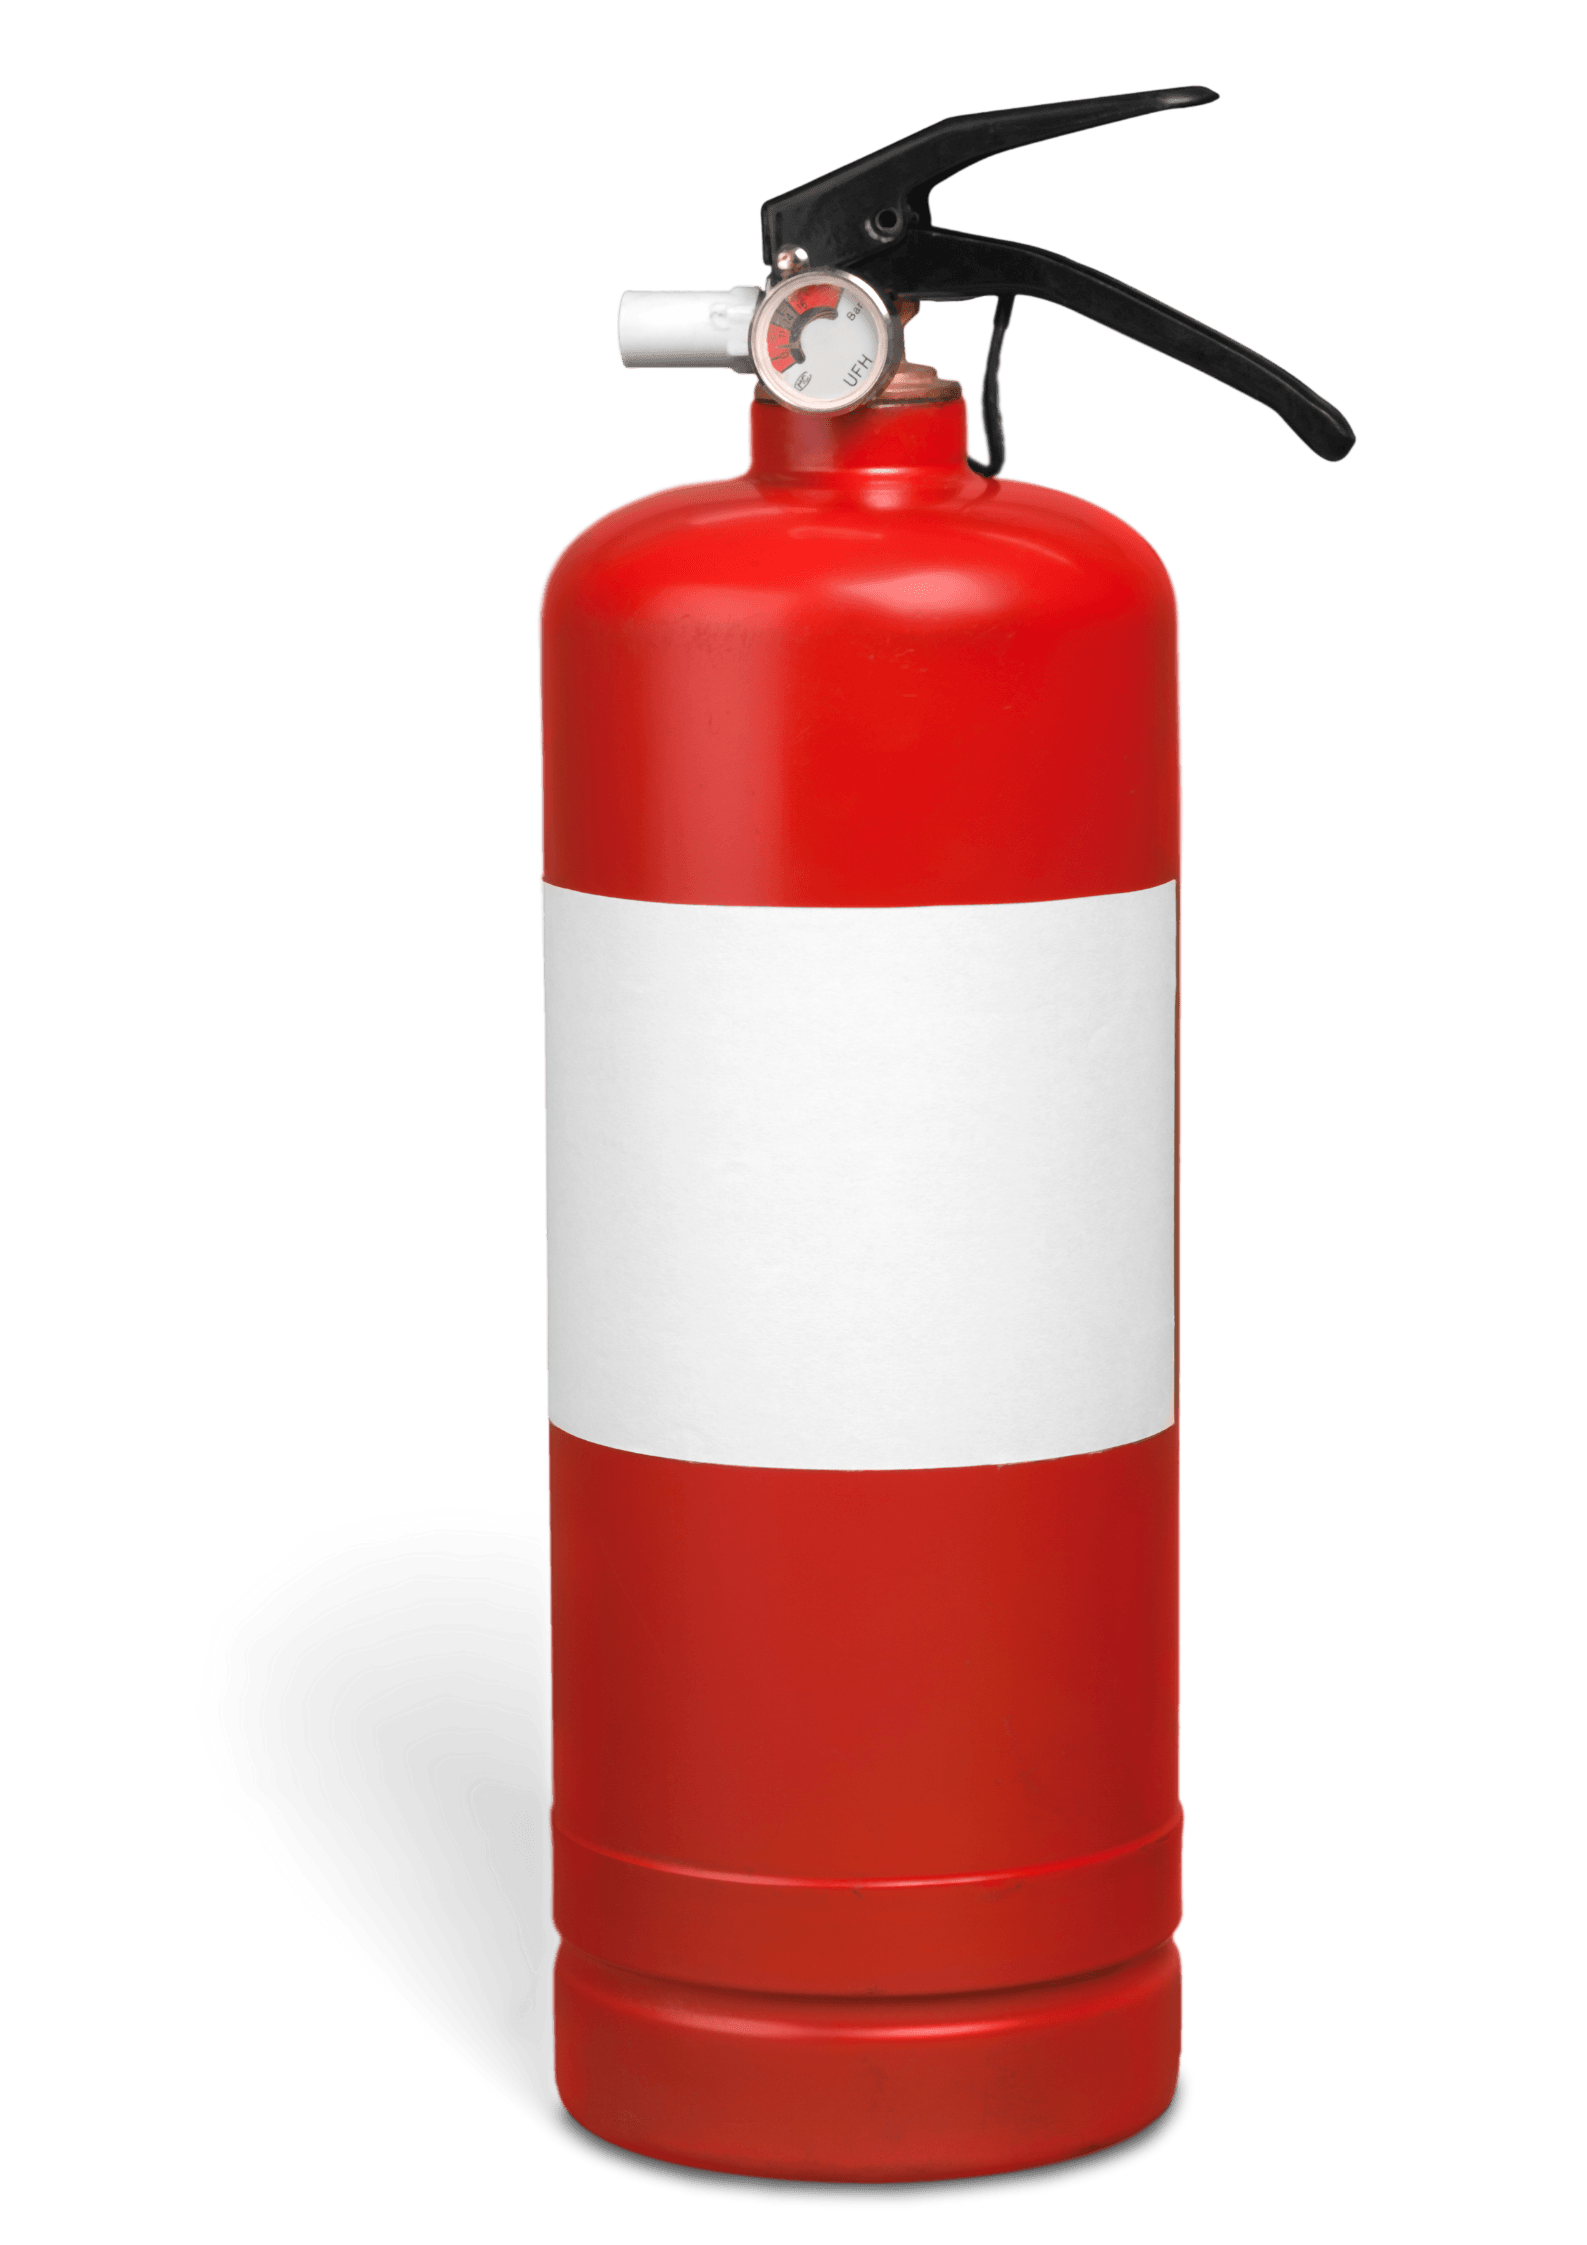 A red and white fire extinguisher